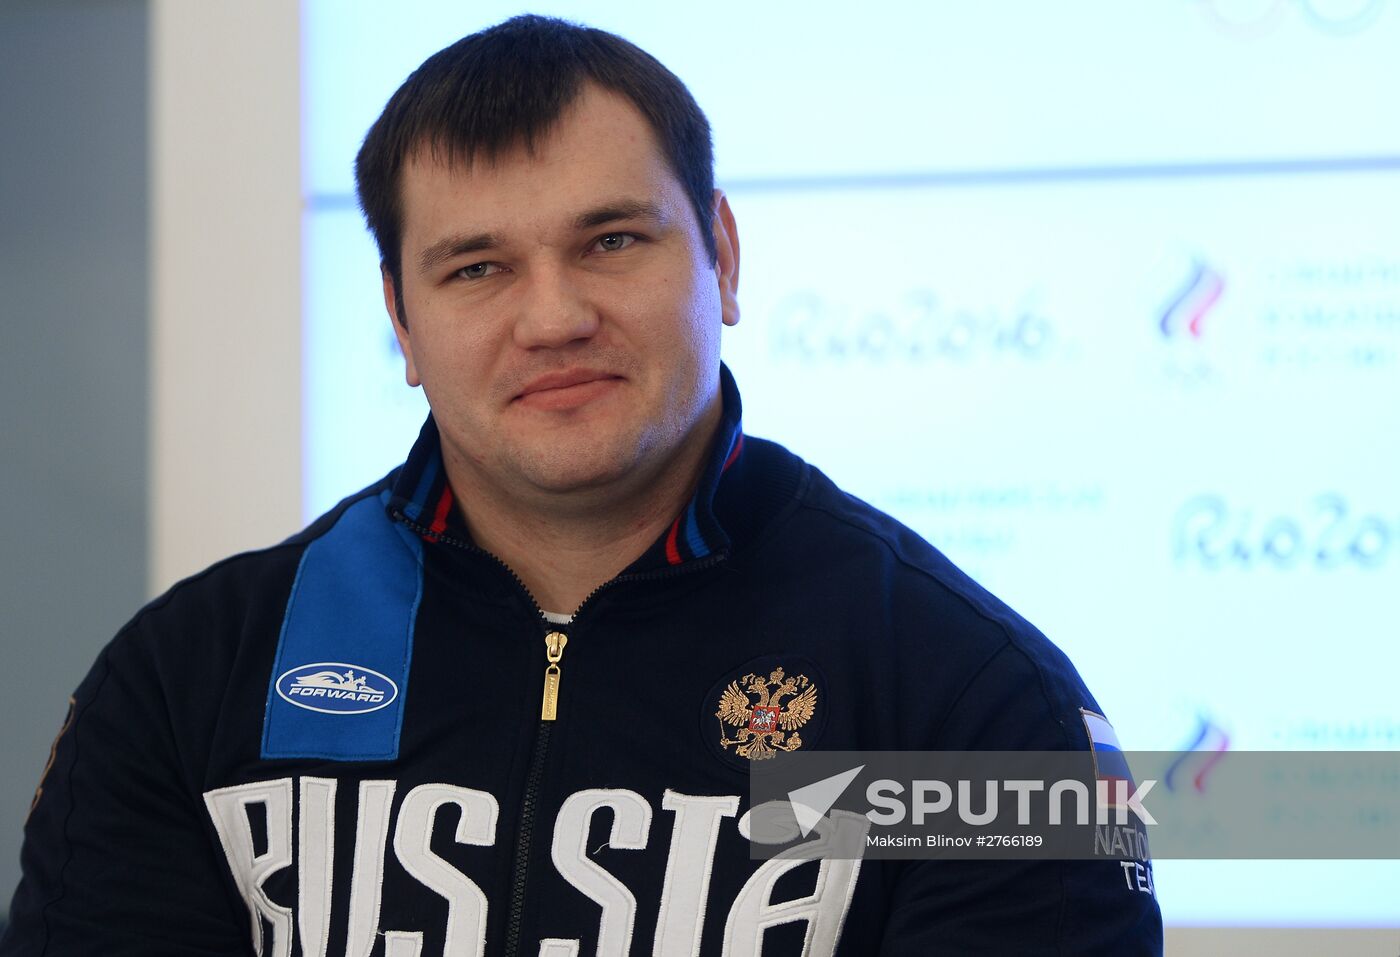 News conference by Russian Weightlifting Federation